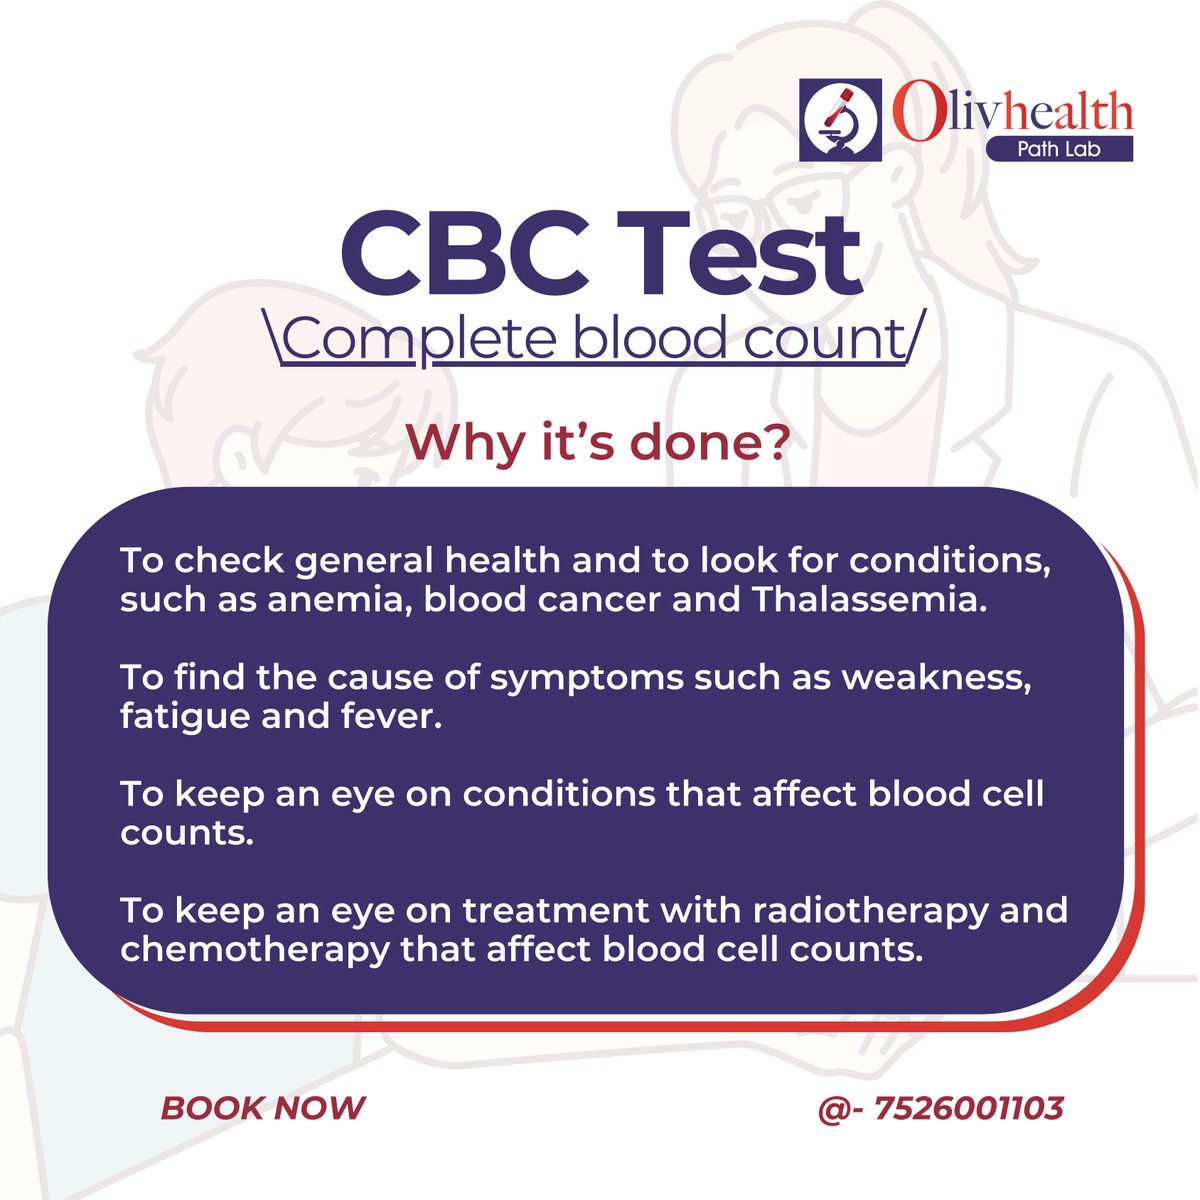 'Stay ahead of your health with our comprehensive CBC tests! From detecting anemia to monitoring treatment progress, OlivHealth Path Lab is here to support your well-being every step of the way.'

#HealthFirst #CBCtest #OlivHealthPathLab #pathlab #healthcare